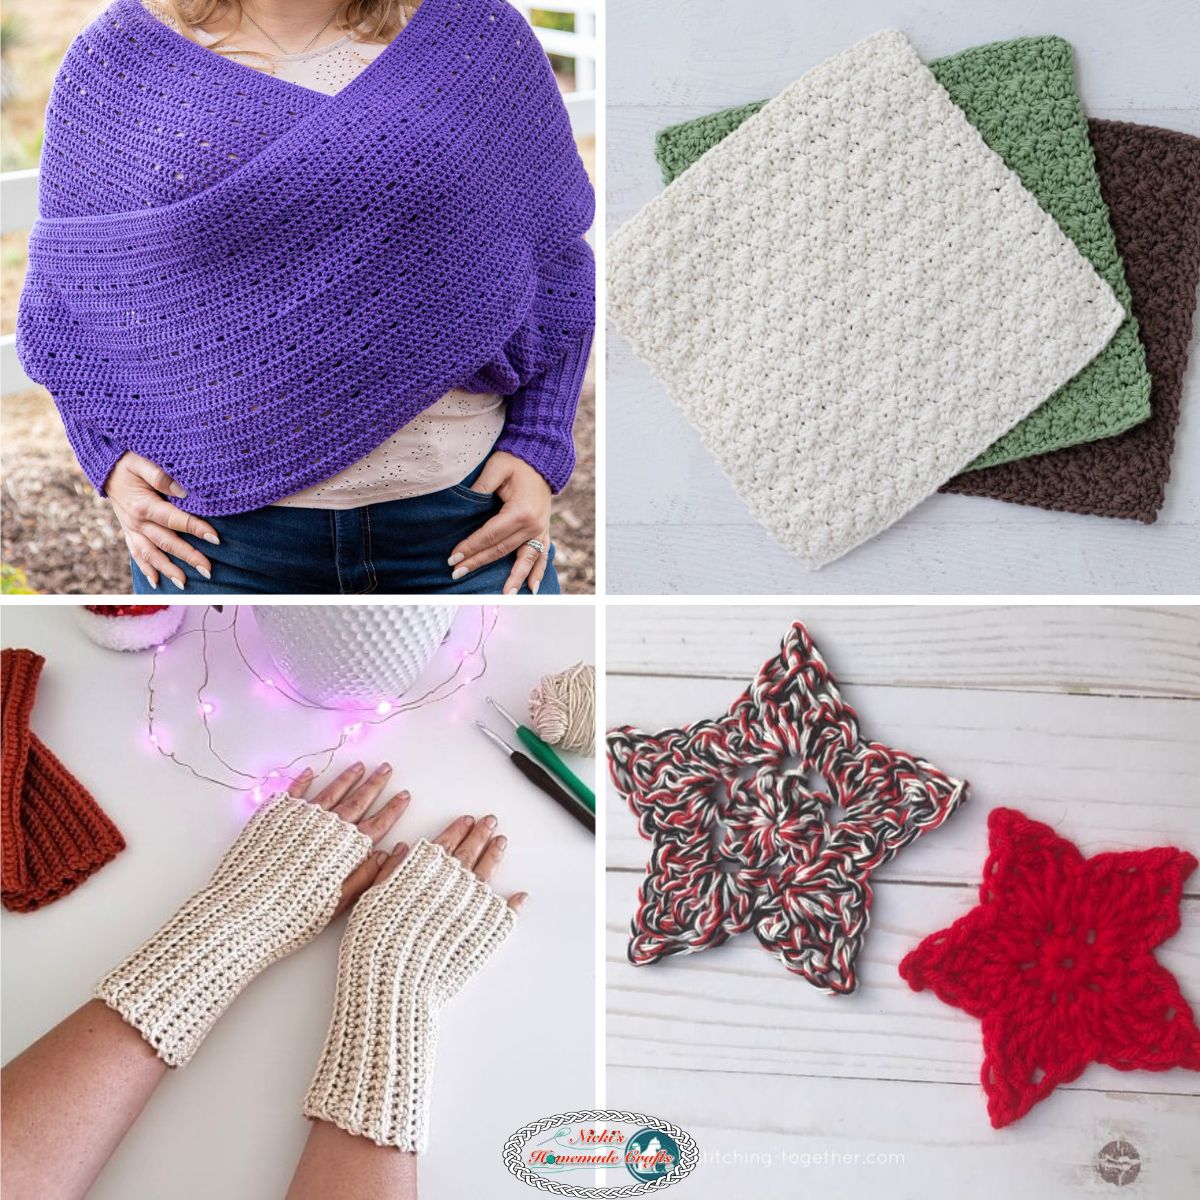 10 Easy Crochet Projects for Beginners - Free Patterns - Nicki's Homemade  Crafts